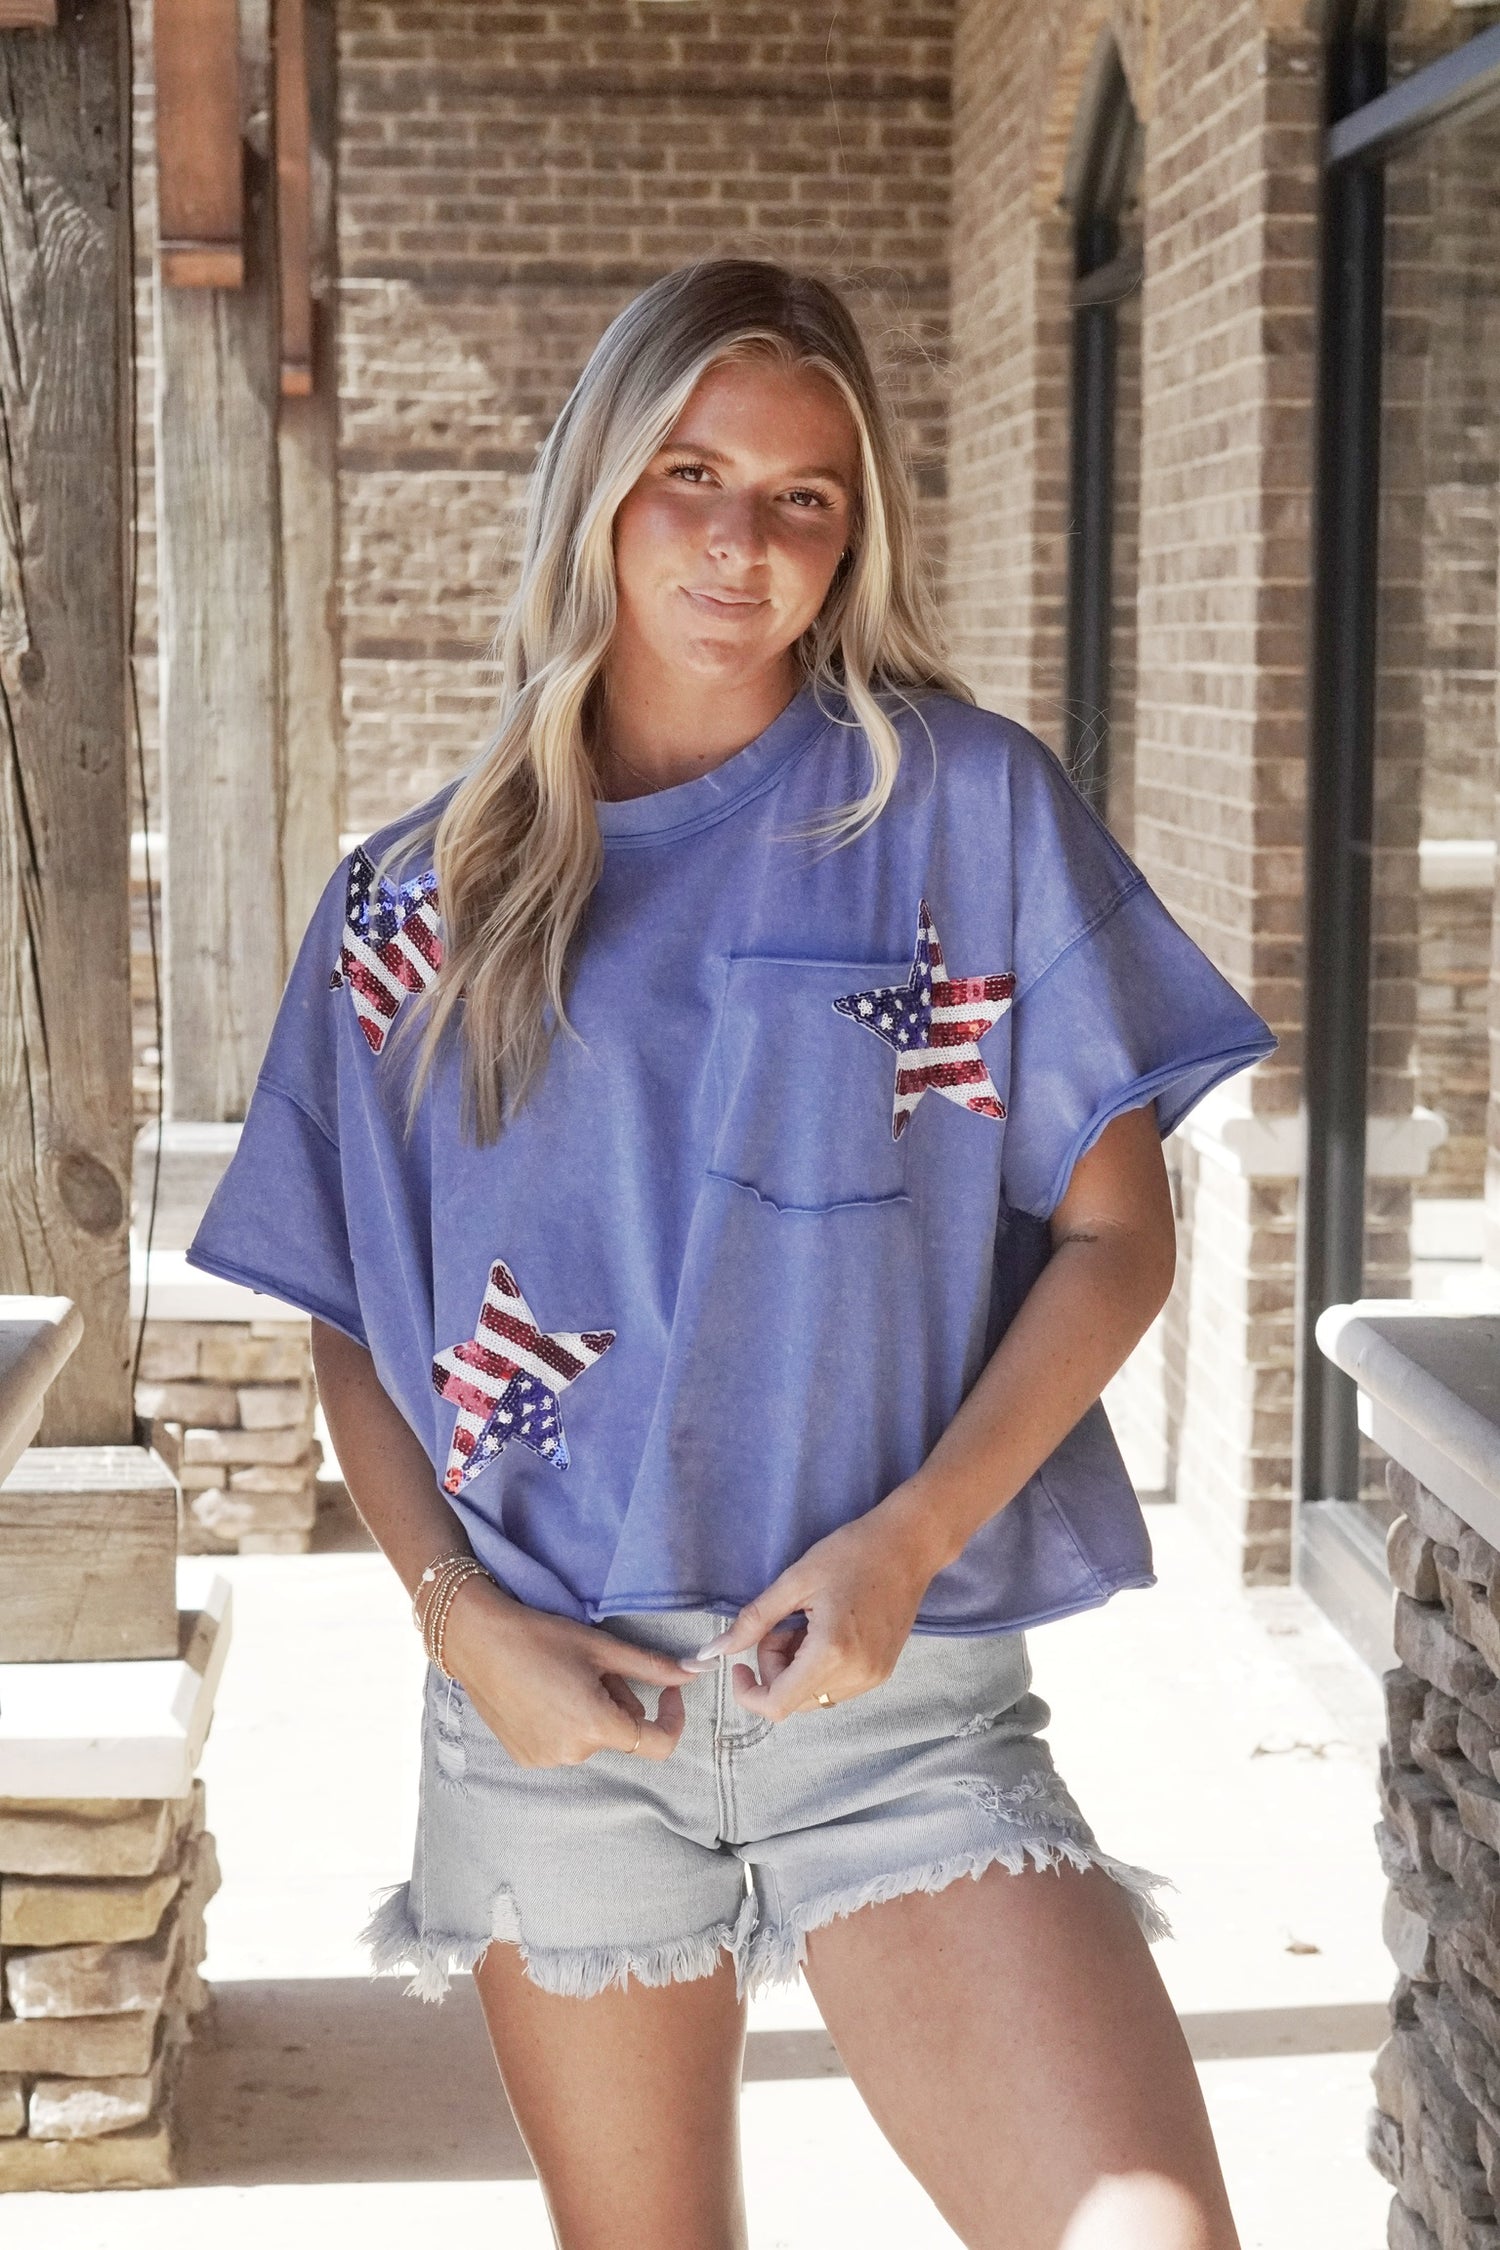 American Made Star Sequin Patch Top Round Neckline Sequin Star Patches Short Sleeves Color: Washed Blue Pocket Tee Cropped Relaxed Fit Fabric Content: 65% Cotton, 35% Polyester